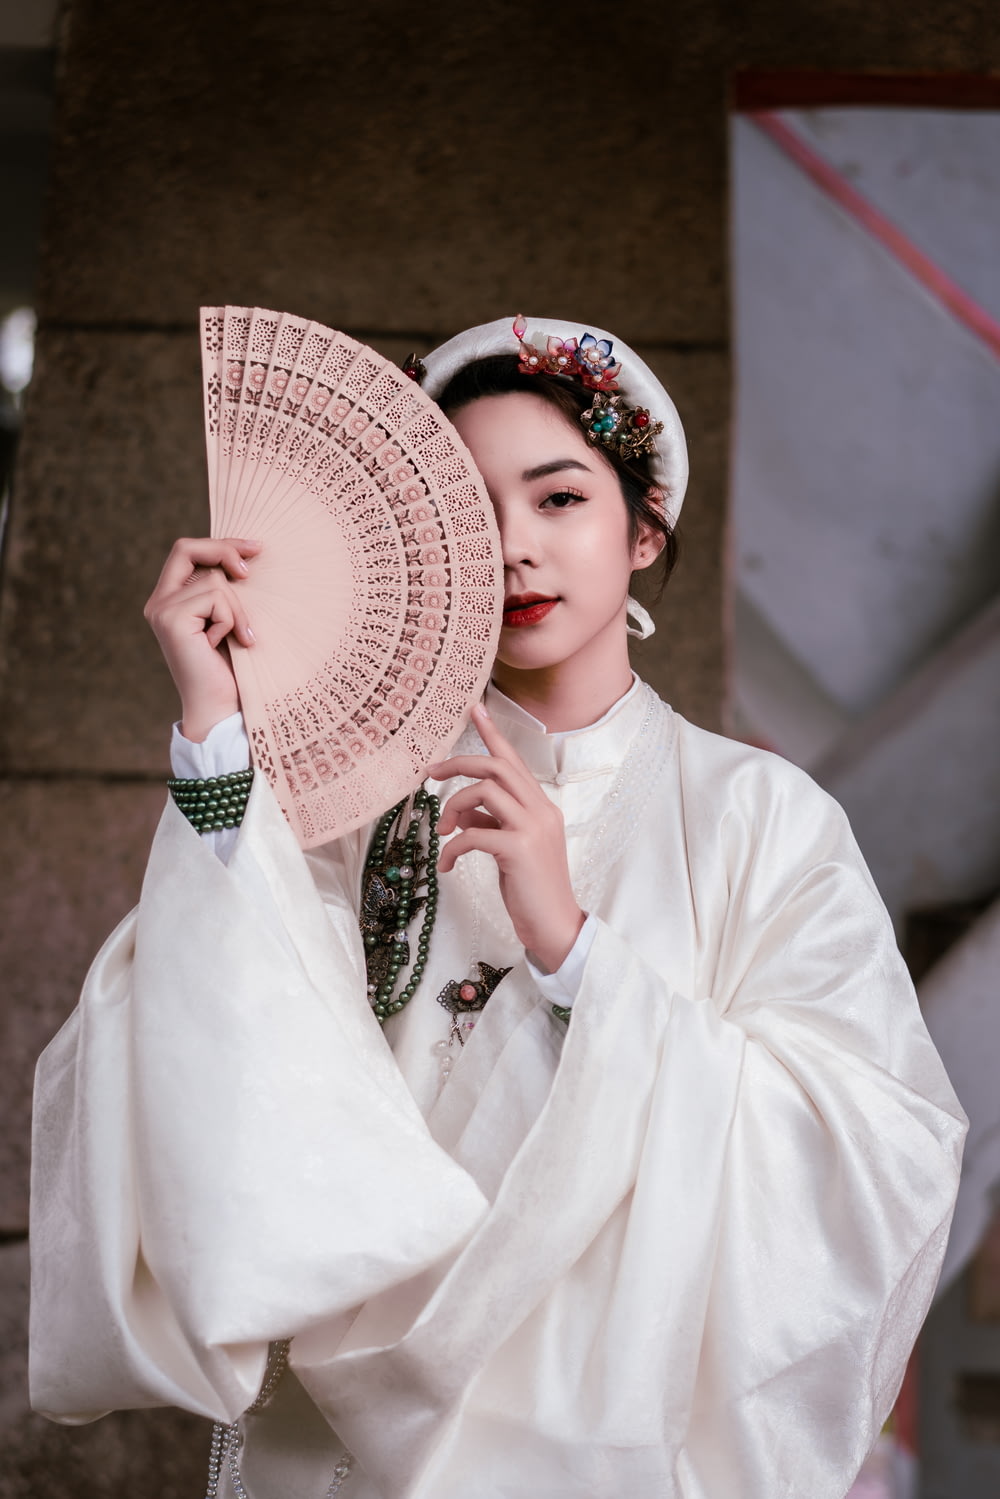 woman in white long sleeve shirt holding white hand fan